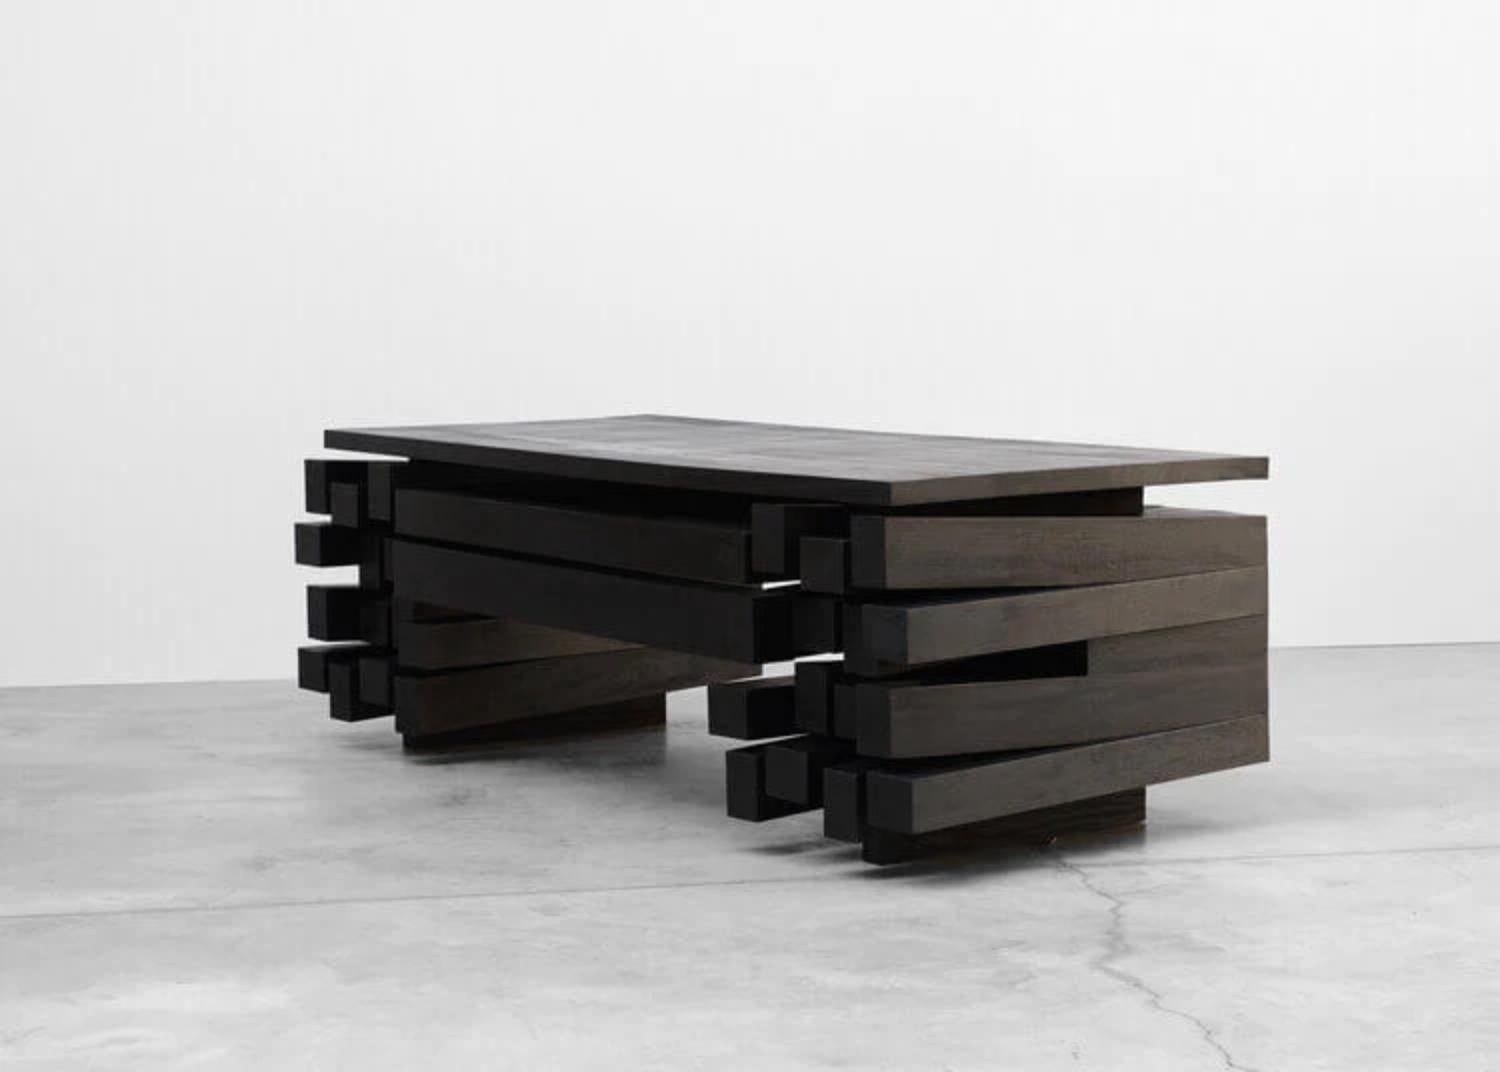 Desk in Iroko Wood by Arno Declercq
Limited Edition of 12 pieces.
Materials: Burned and waxed Iroko wood.
Dimensions: W 233 x D 100 x H 75 cm


Arno Declercq
Belgian designer and art dealer who makes bespoke objects with passion for design,